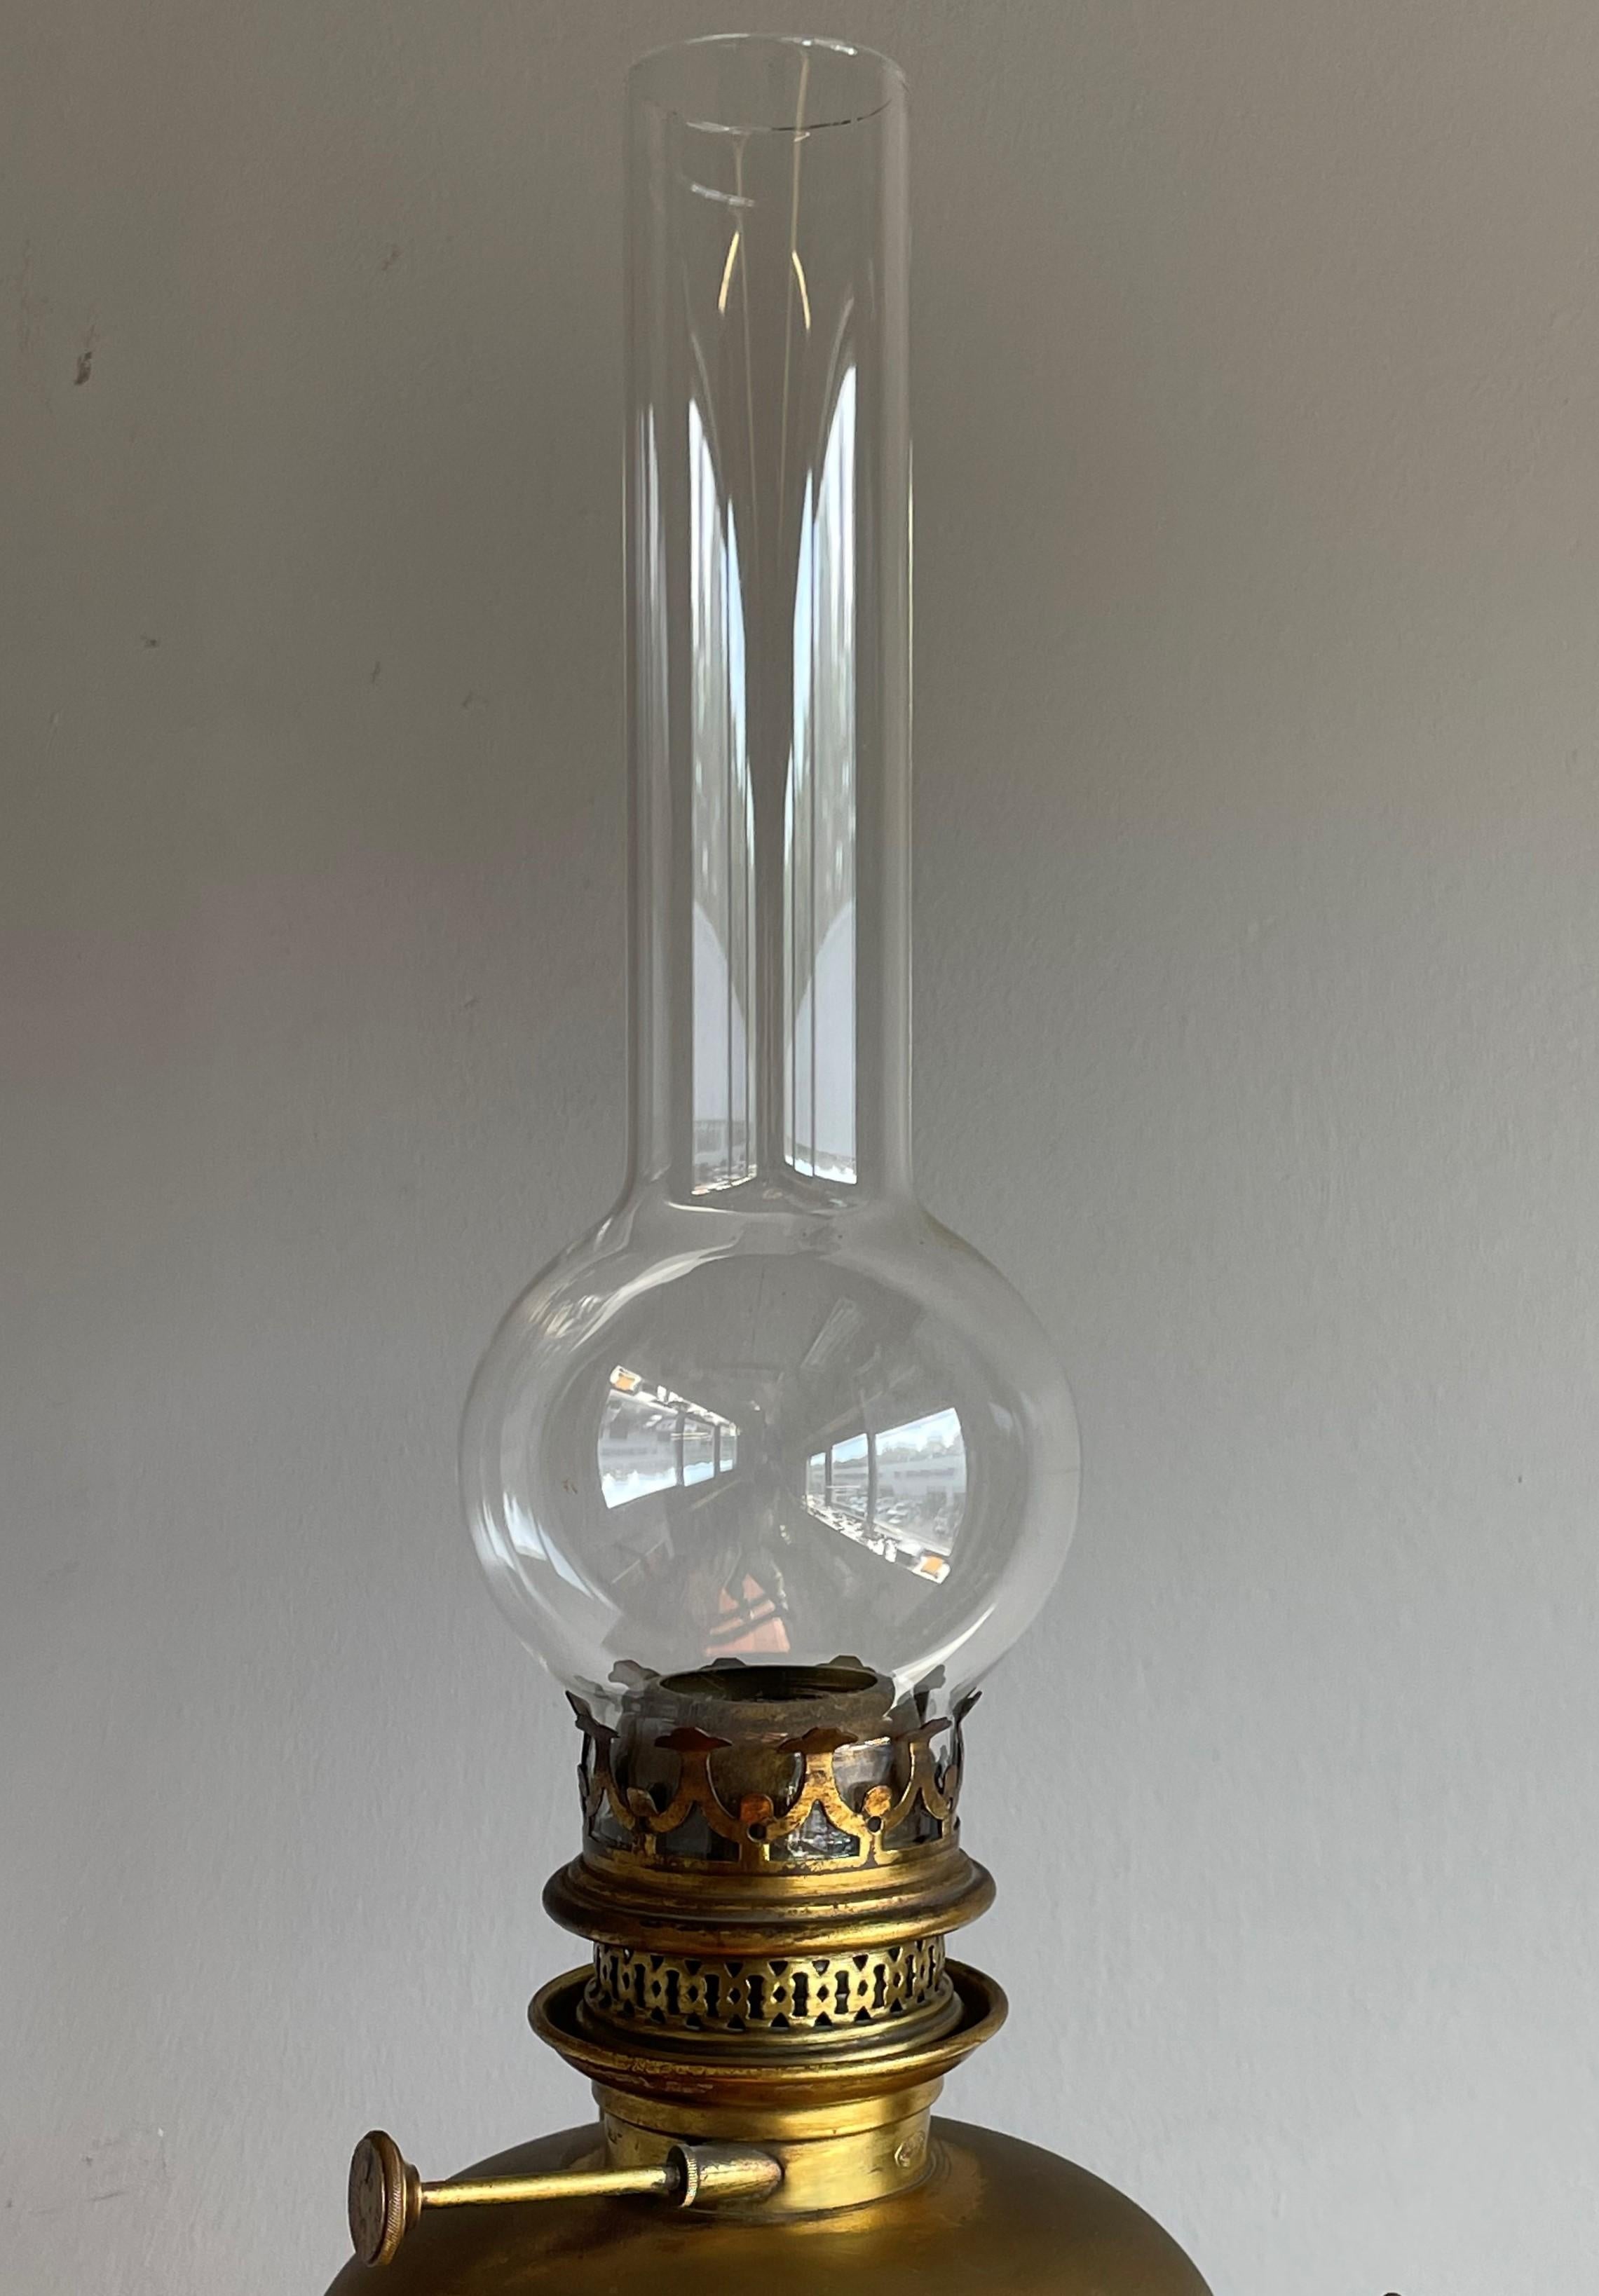 Stunning 19th Century Empire Revival Bronze & Glass Oil Floor Lamp By H. Luppens For Sale 5